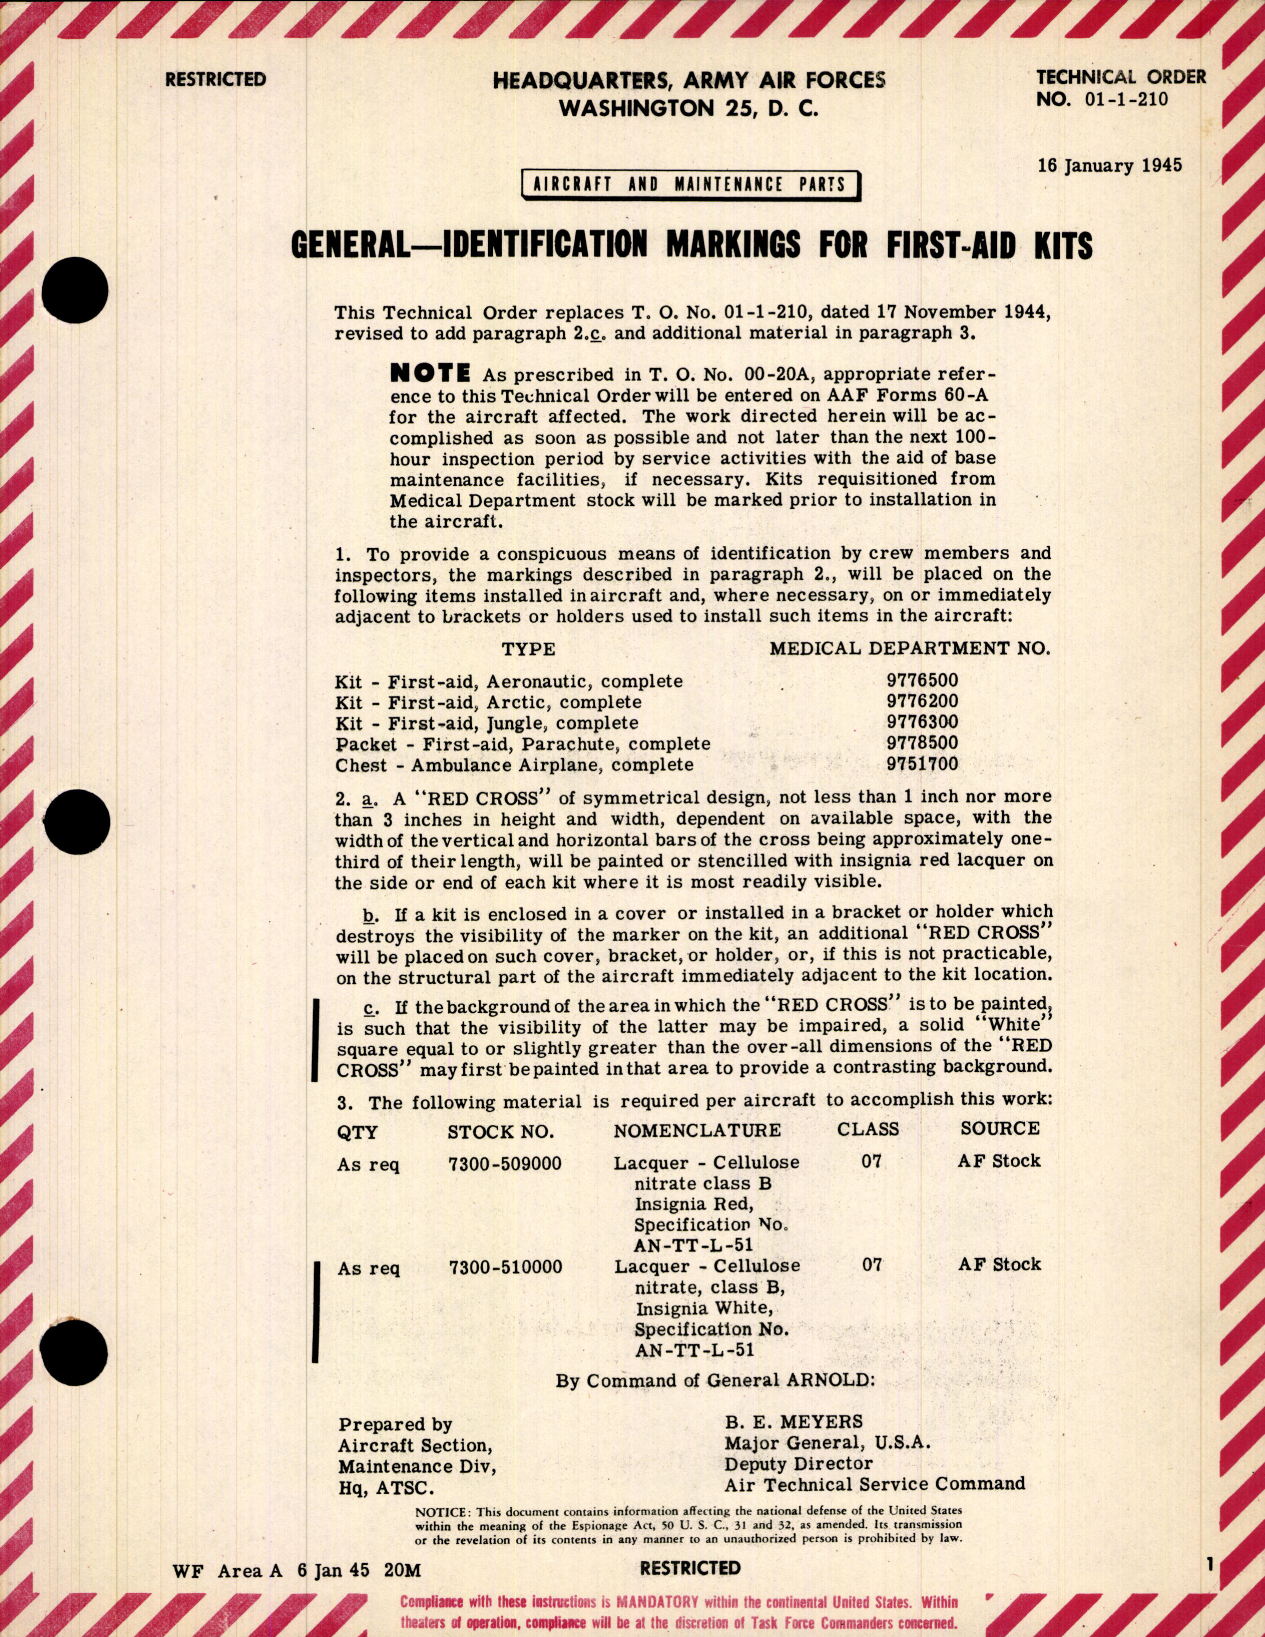 Sample page 1 from AirCorps Library document: Aircraft and Maintenance Parts; Identification Markings for First-Aid Kits